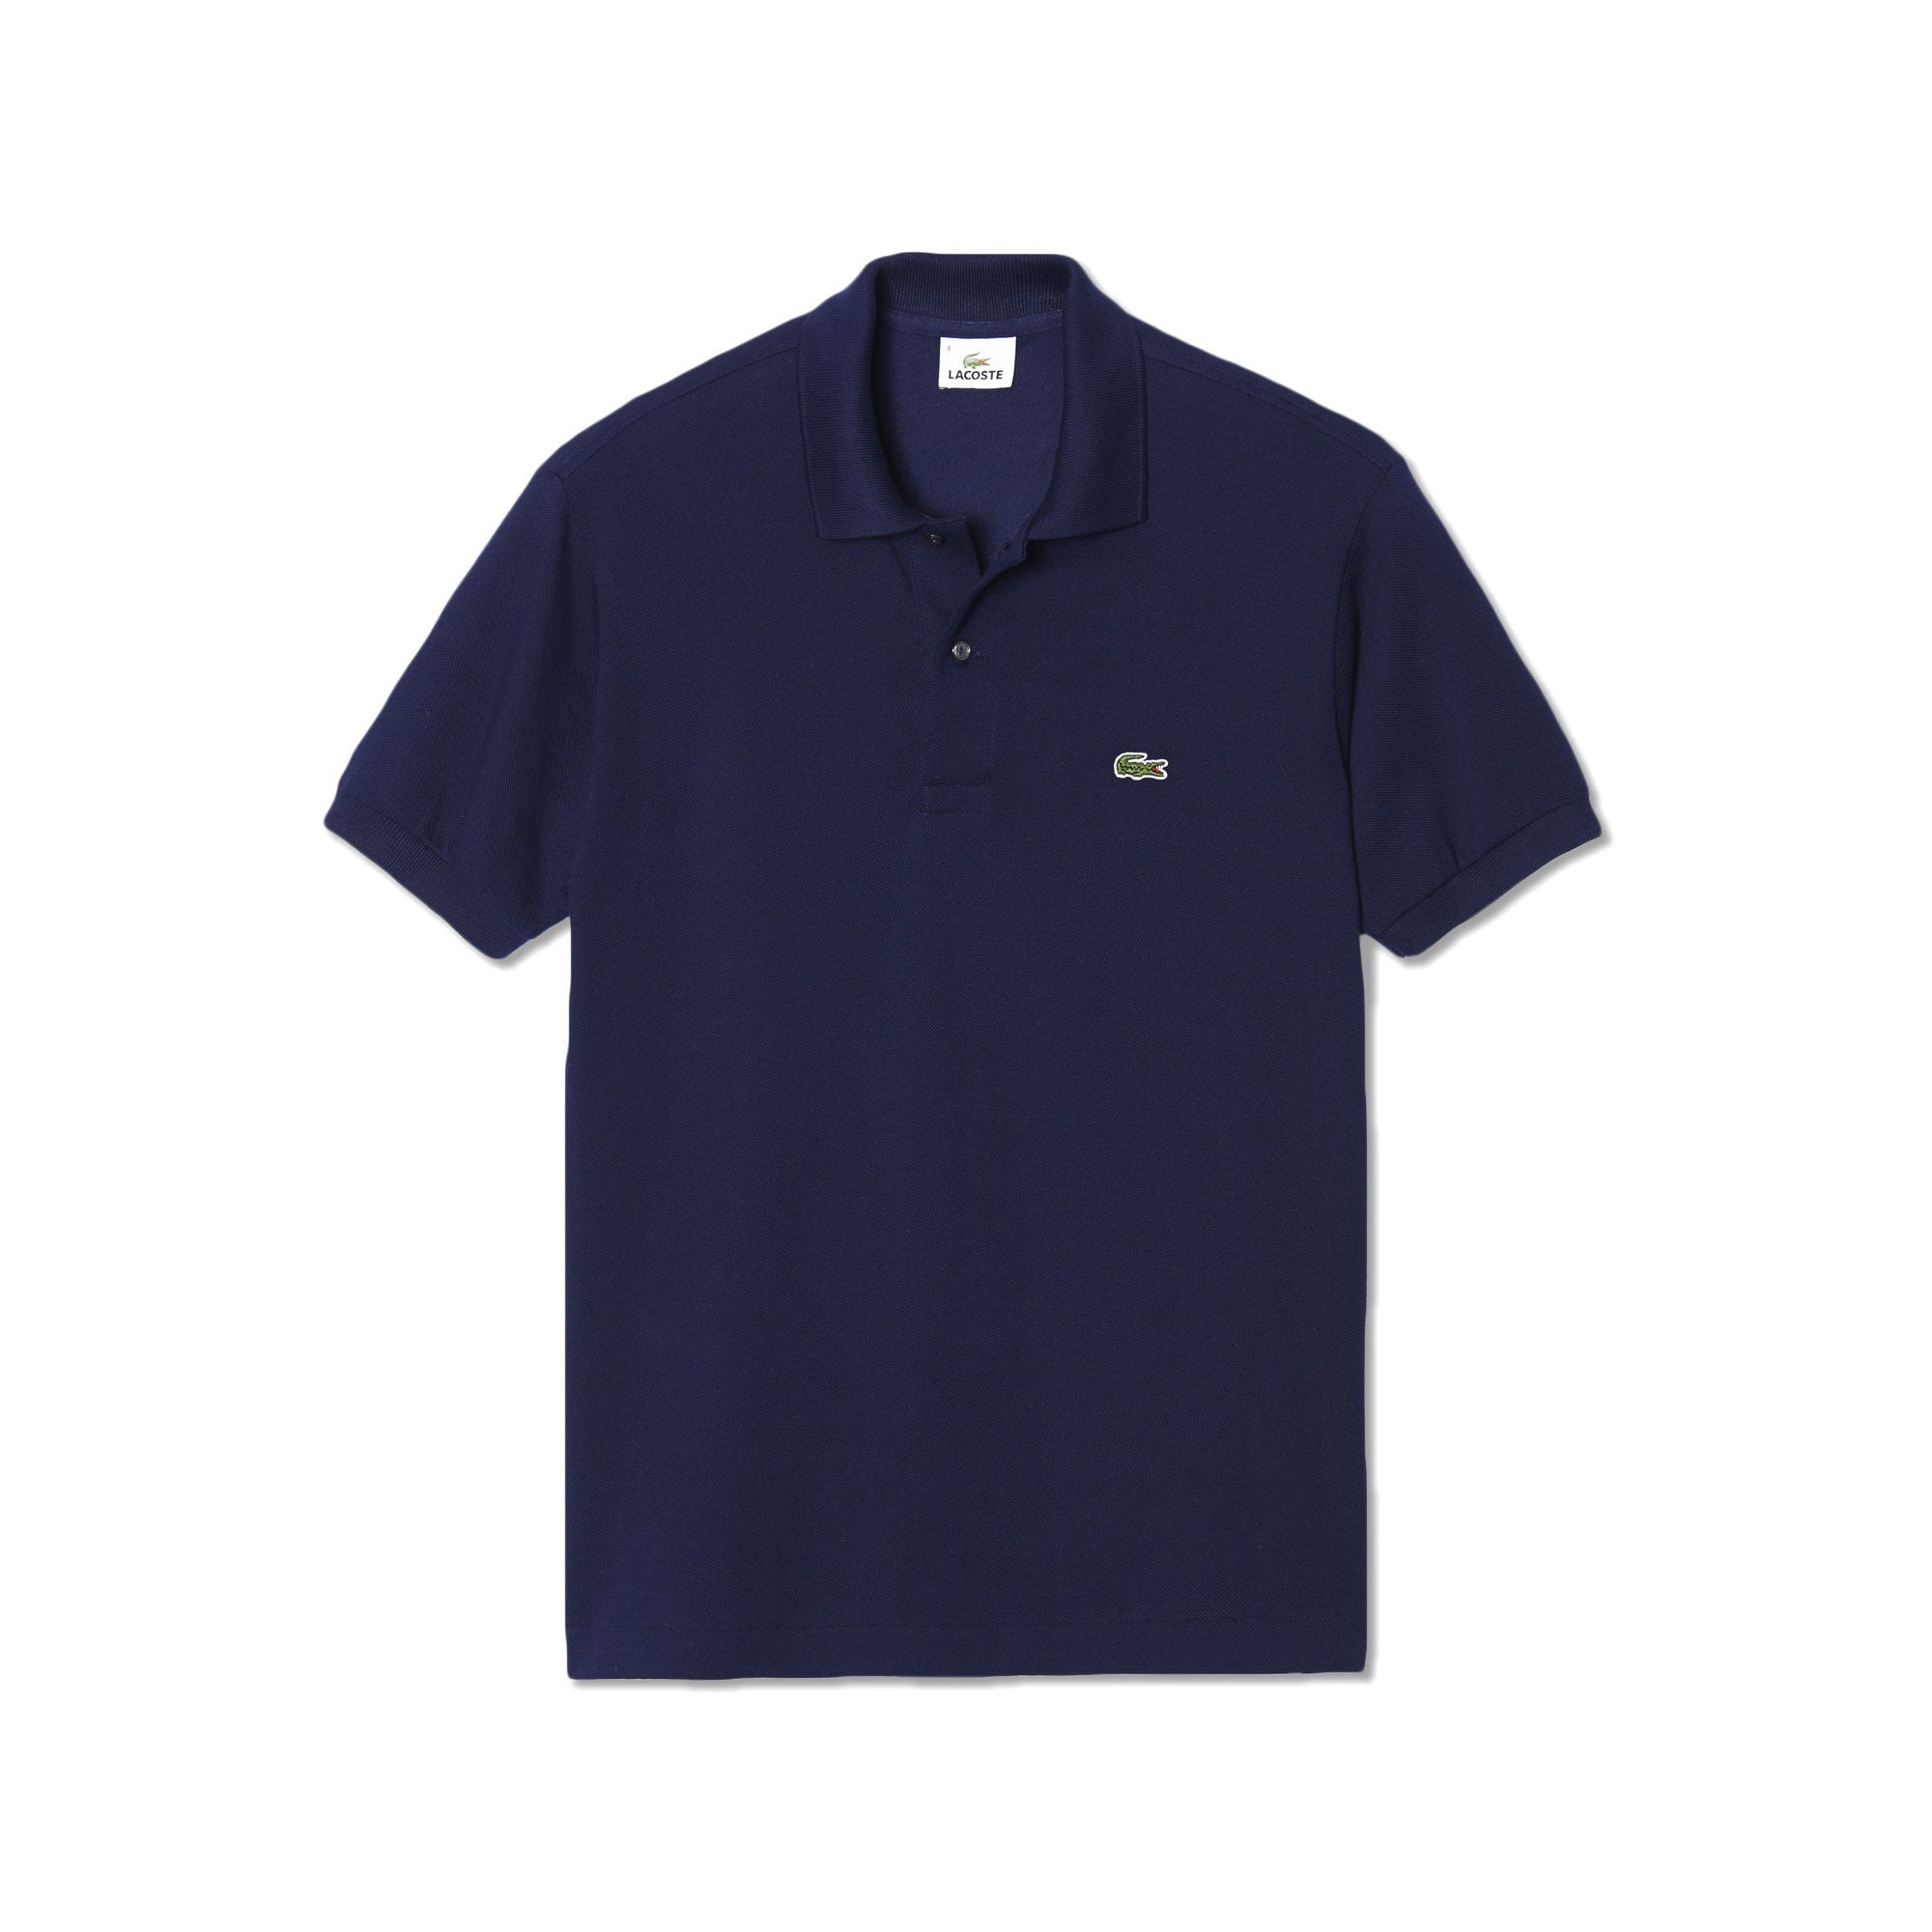 LACOSTE POLO SHIRT NAVY BLUE: Buy sell 